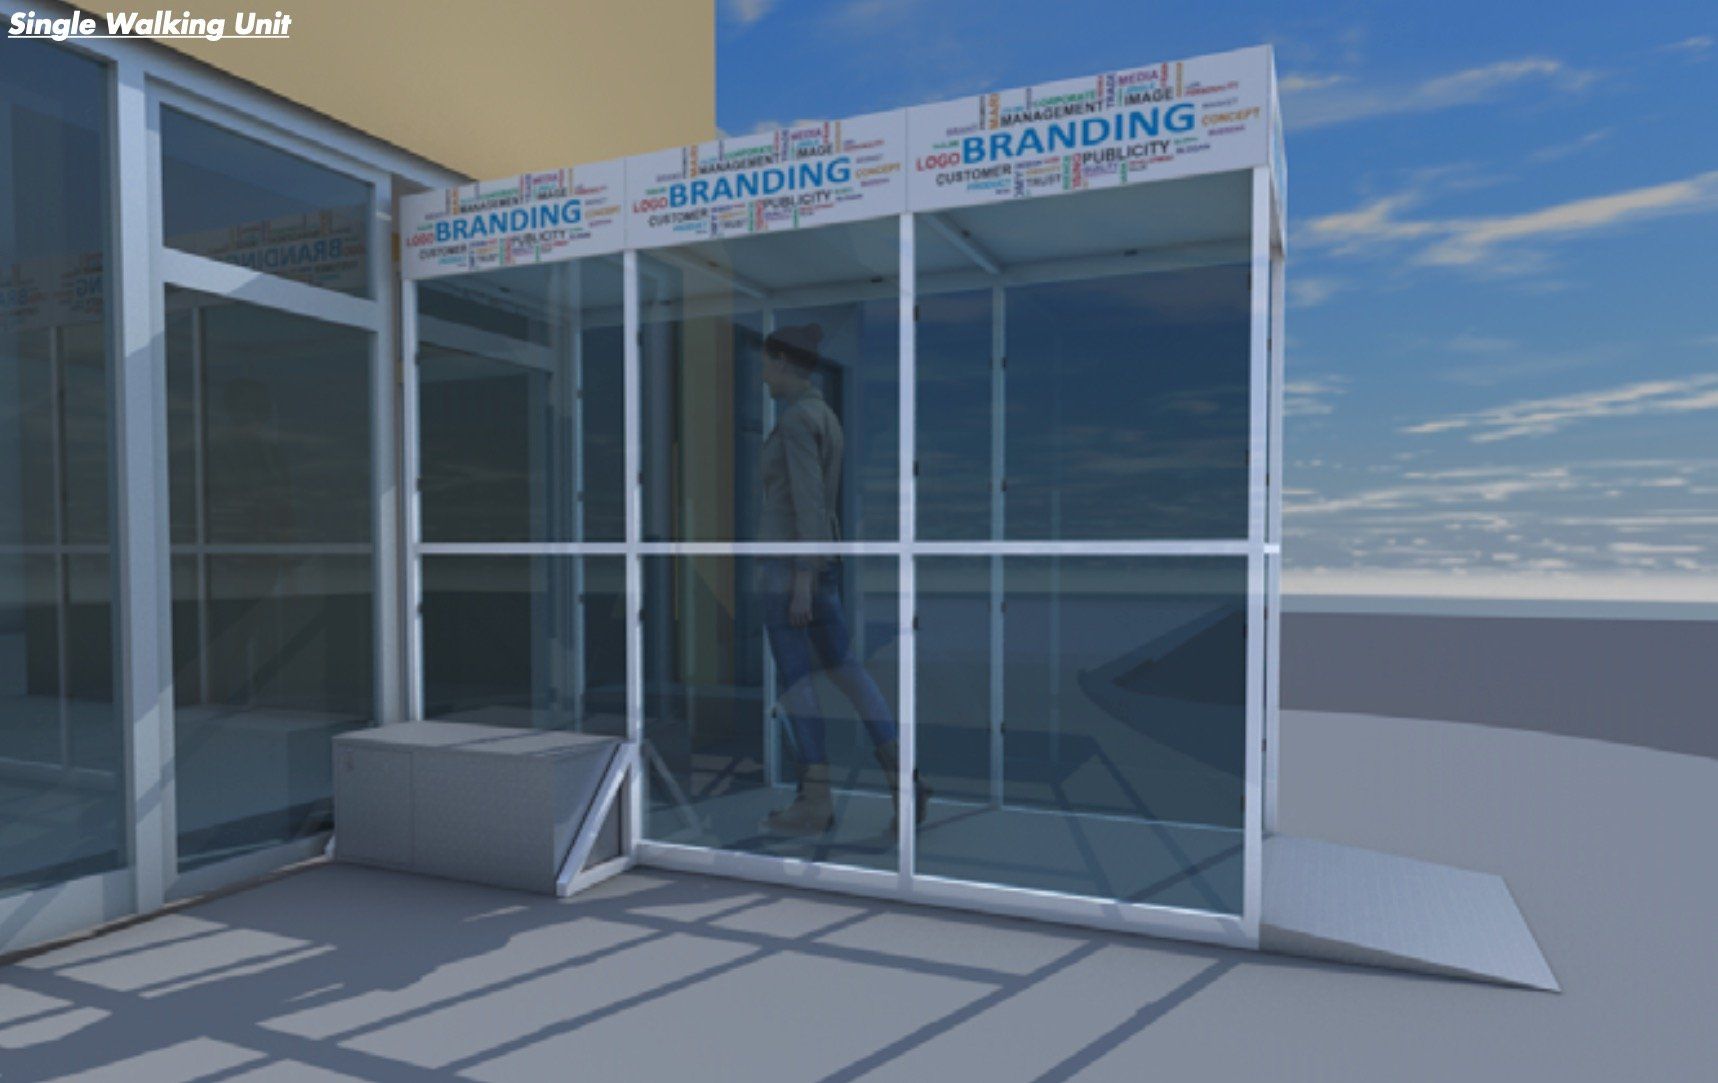 Sanitising solution, decontamination booth walk through. (see the picture)